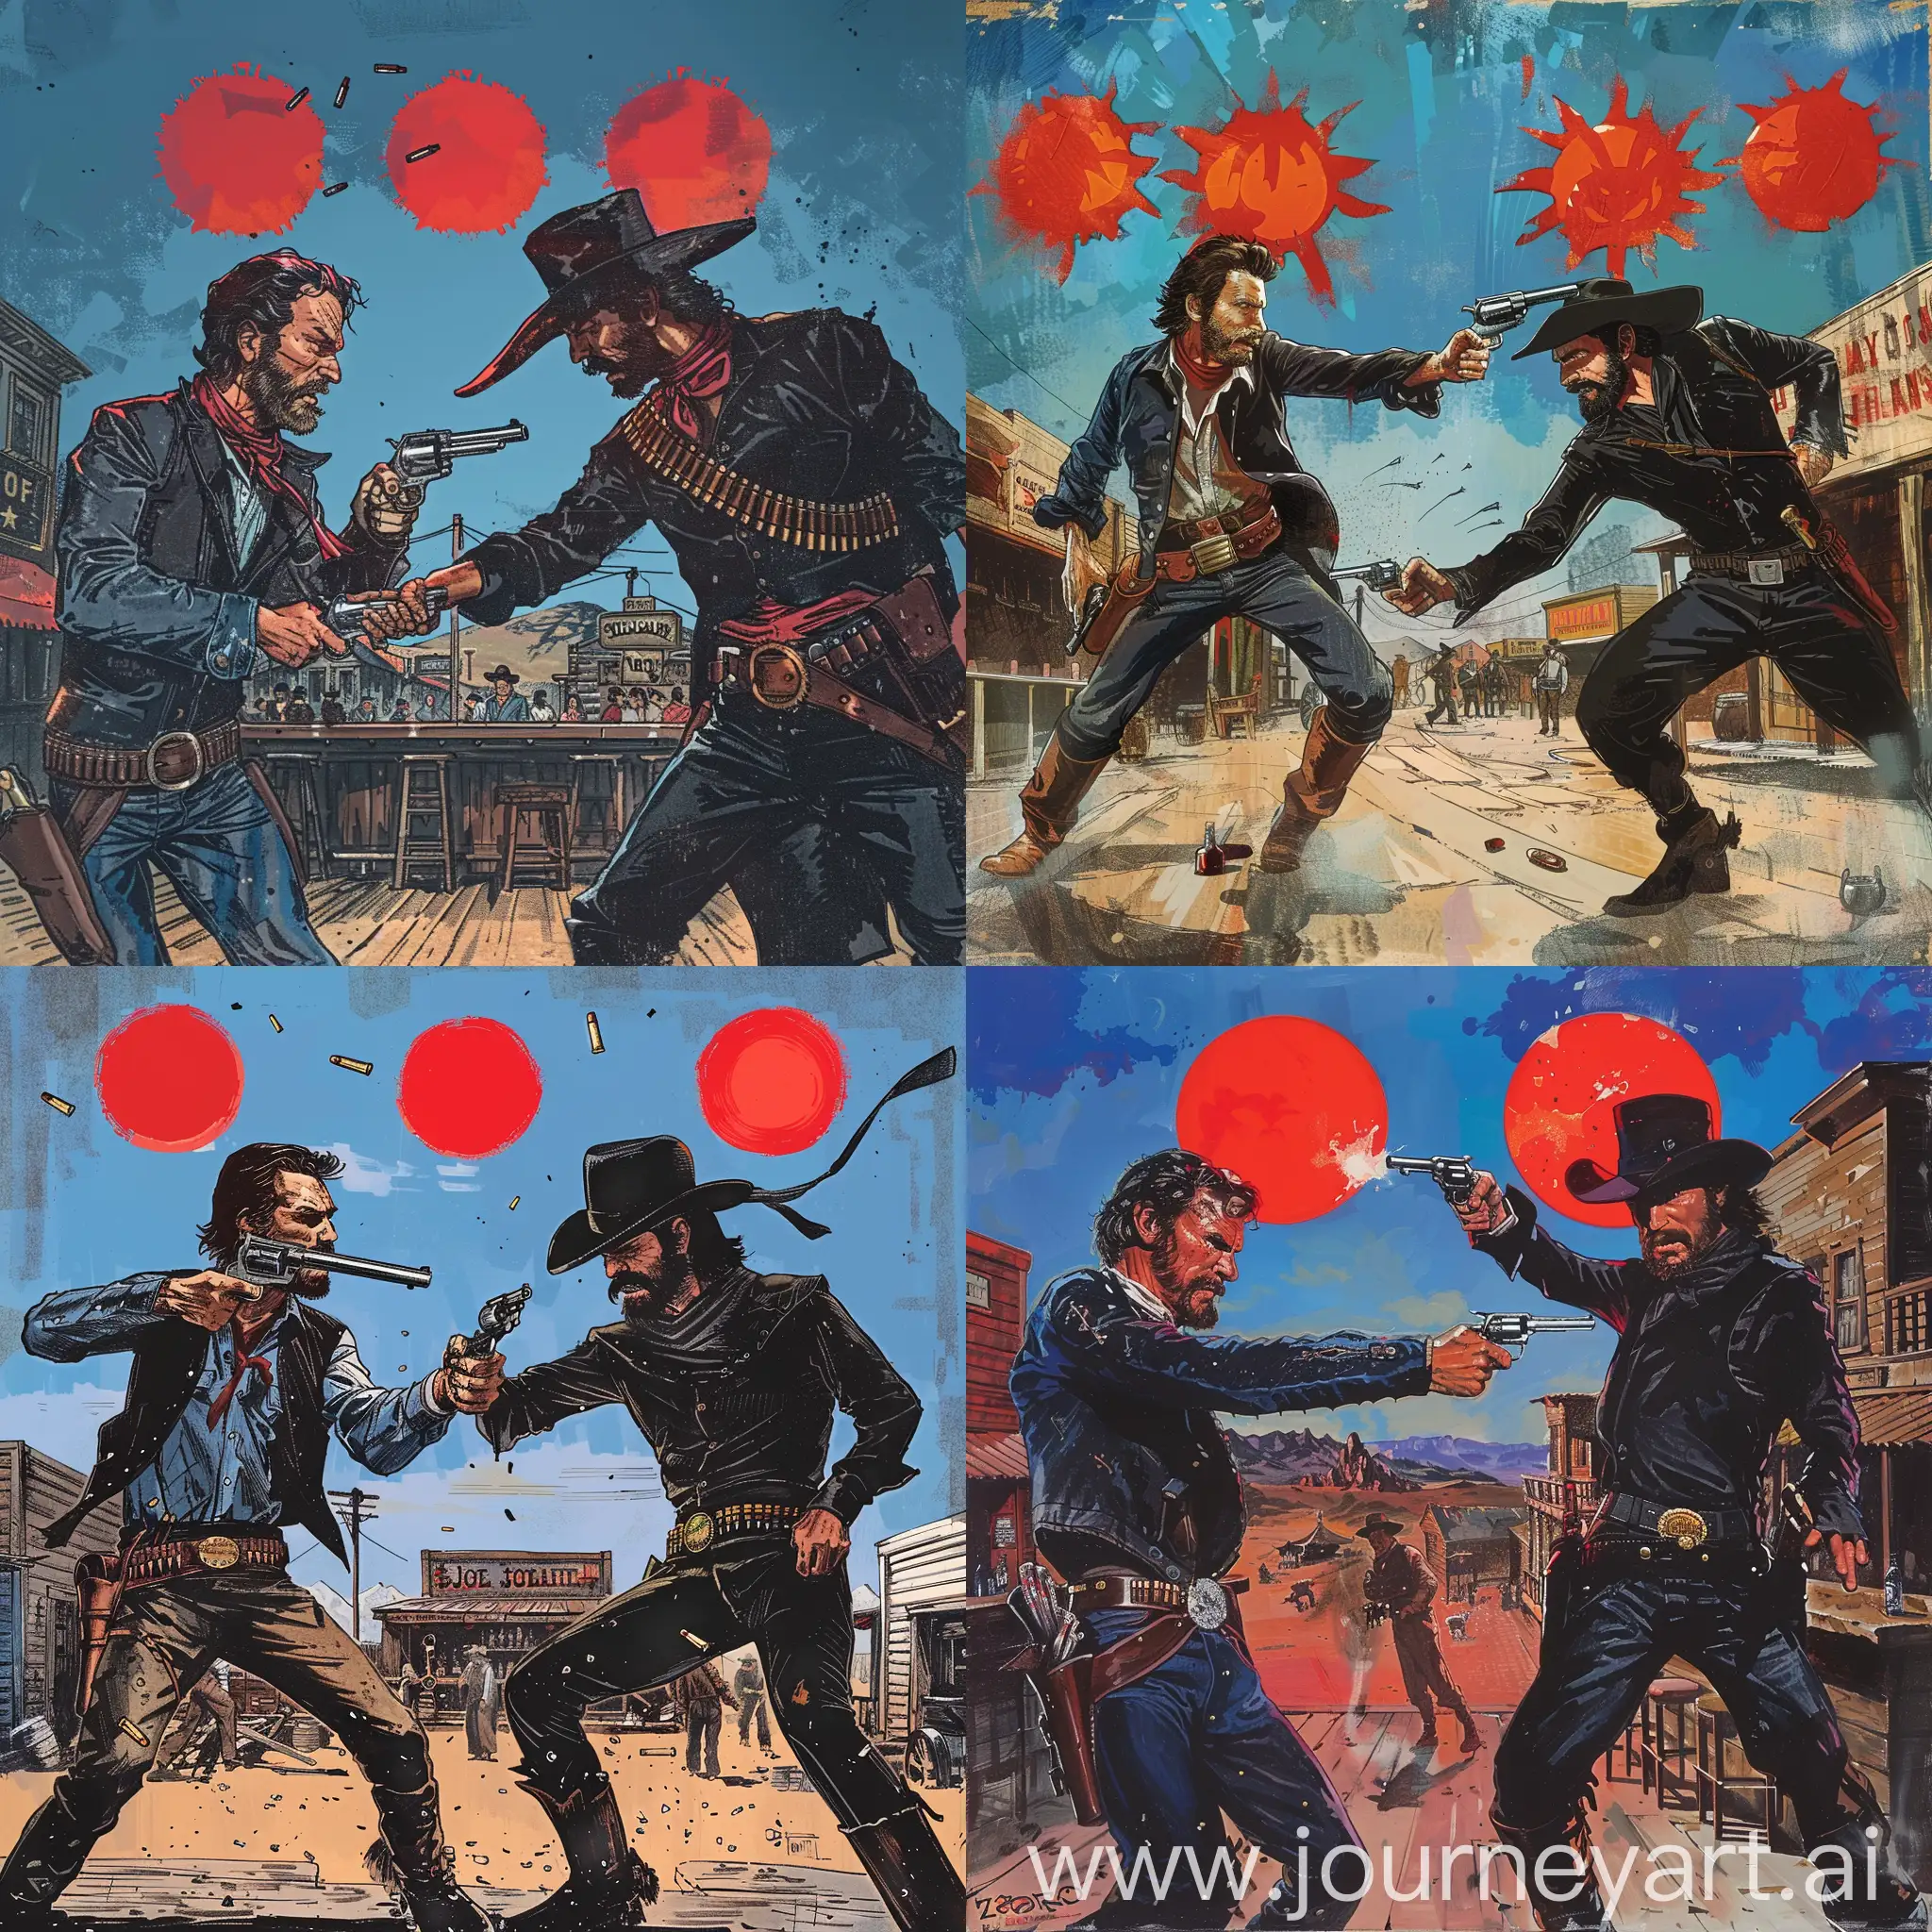 Cowboy-Joe-and-Zorro-Duel-in-19th-Century-Western-Town